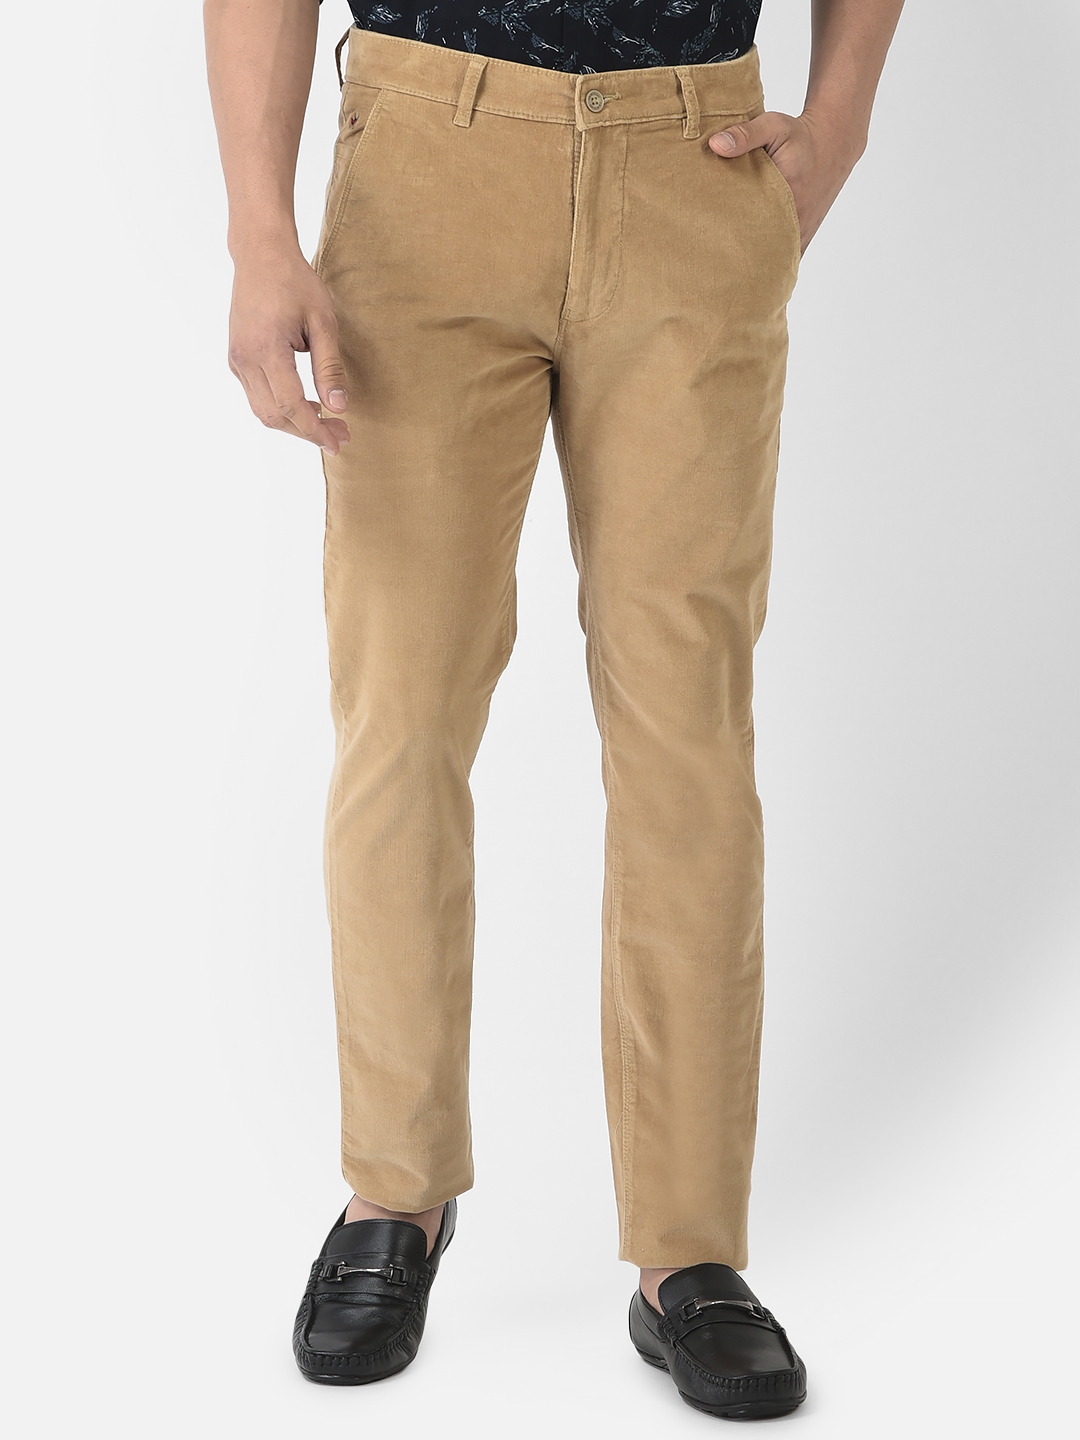 Buy Off-White Trousers & Pants for Men by Crimsoune club Online | Ajio.com